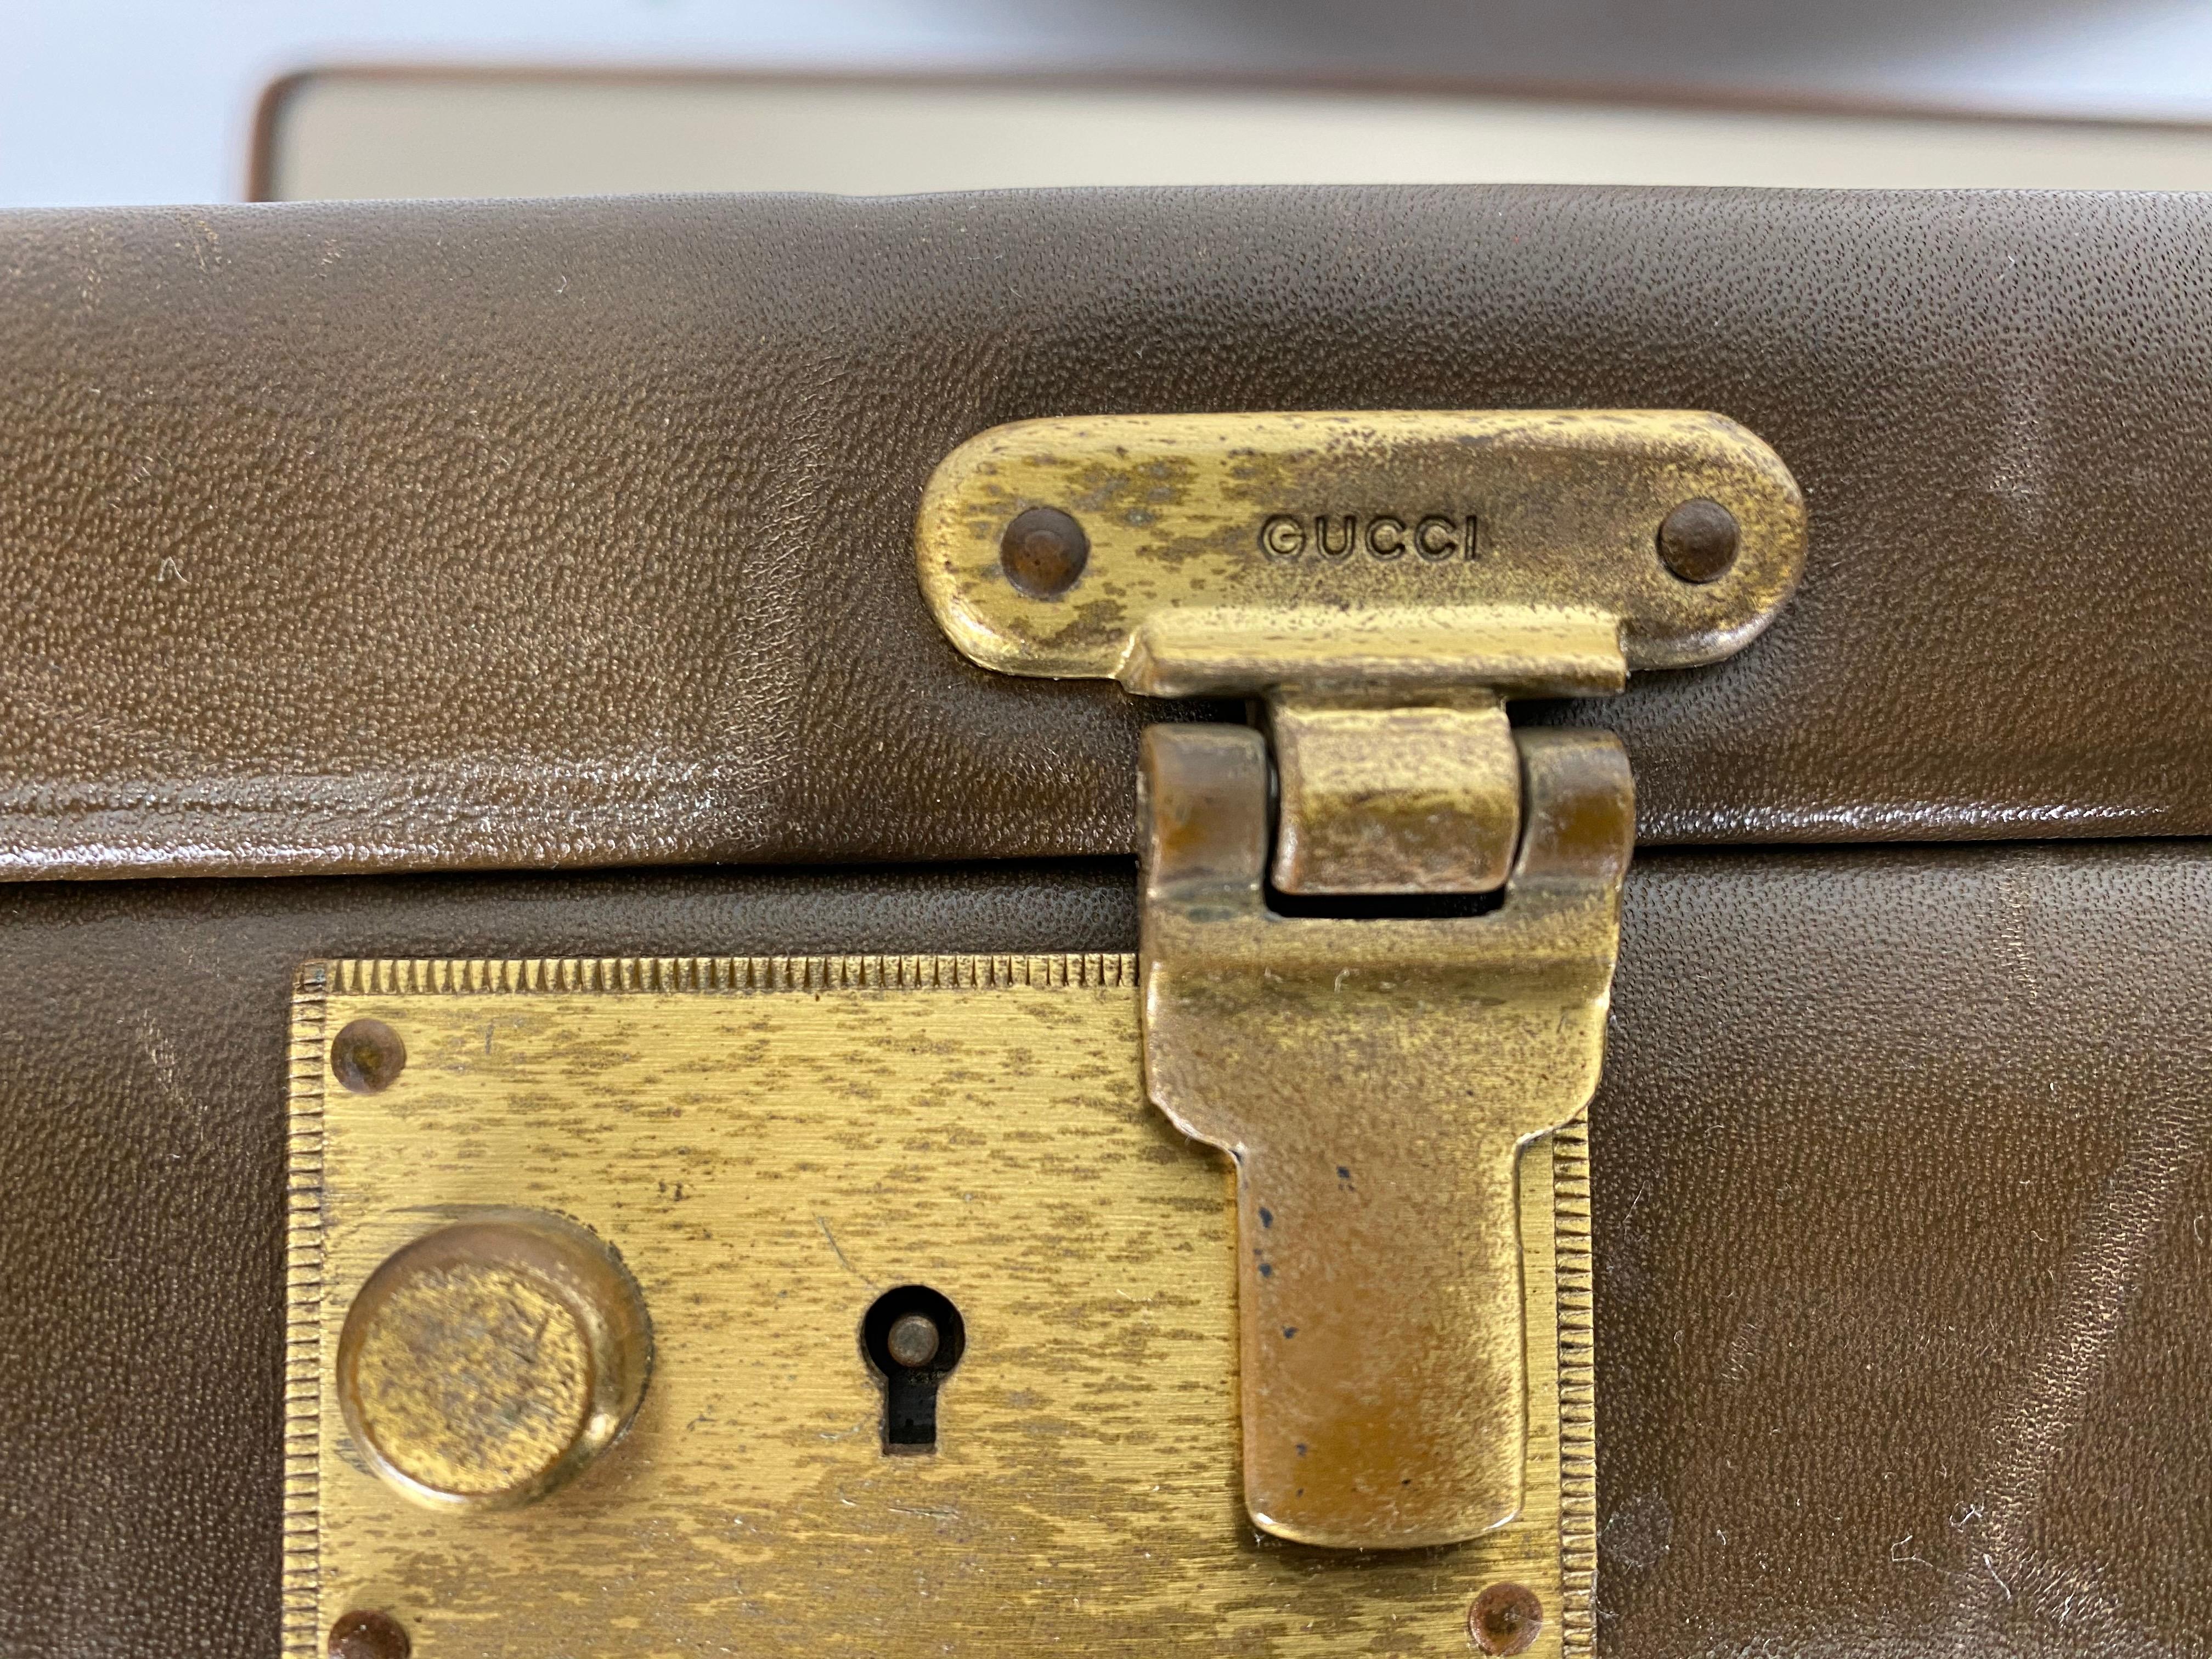 Classic 1970s Gucci Leather Brief Case, Made in Italy In Good Condition For Sale In Buffalo, NY